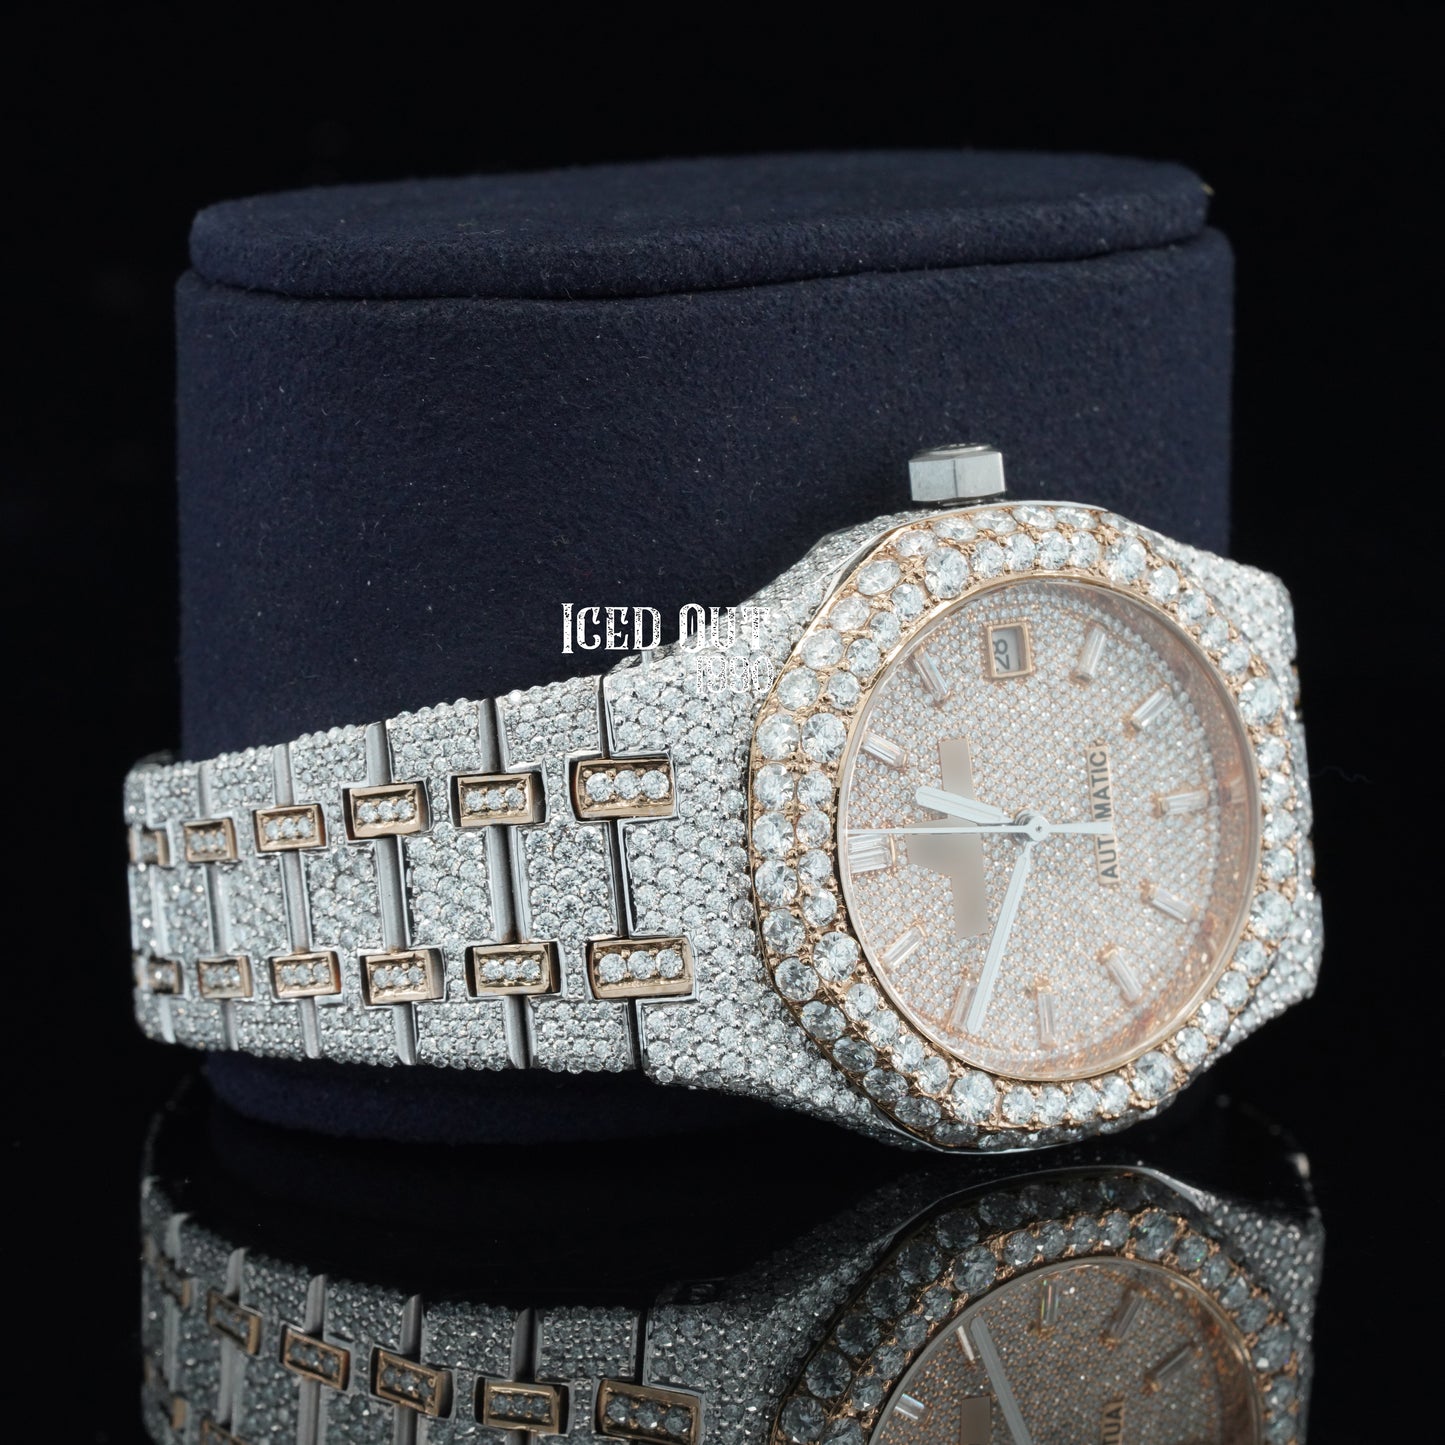 Magnificent Elegant Look Moissanite Diamond Iced Out Bust Down Watch For Men